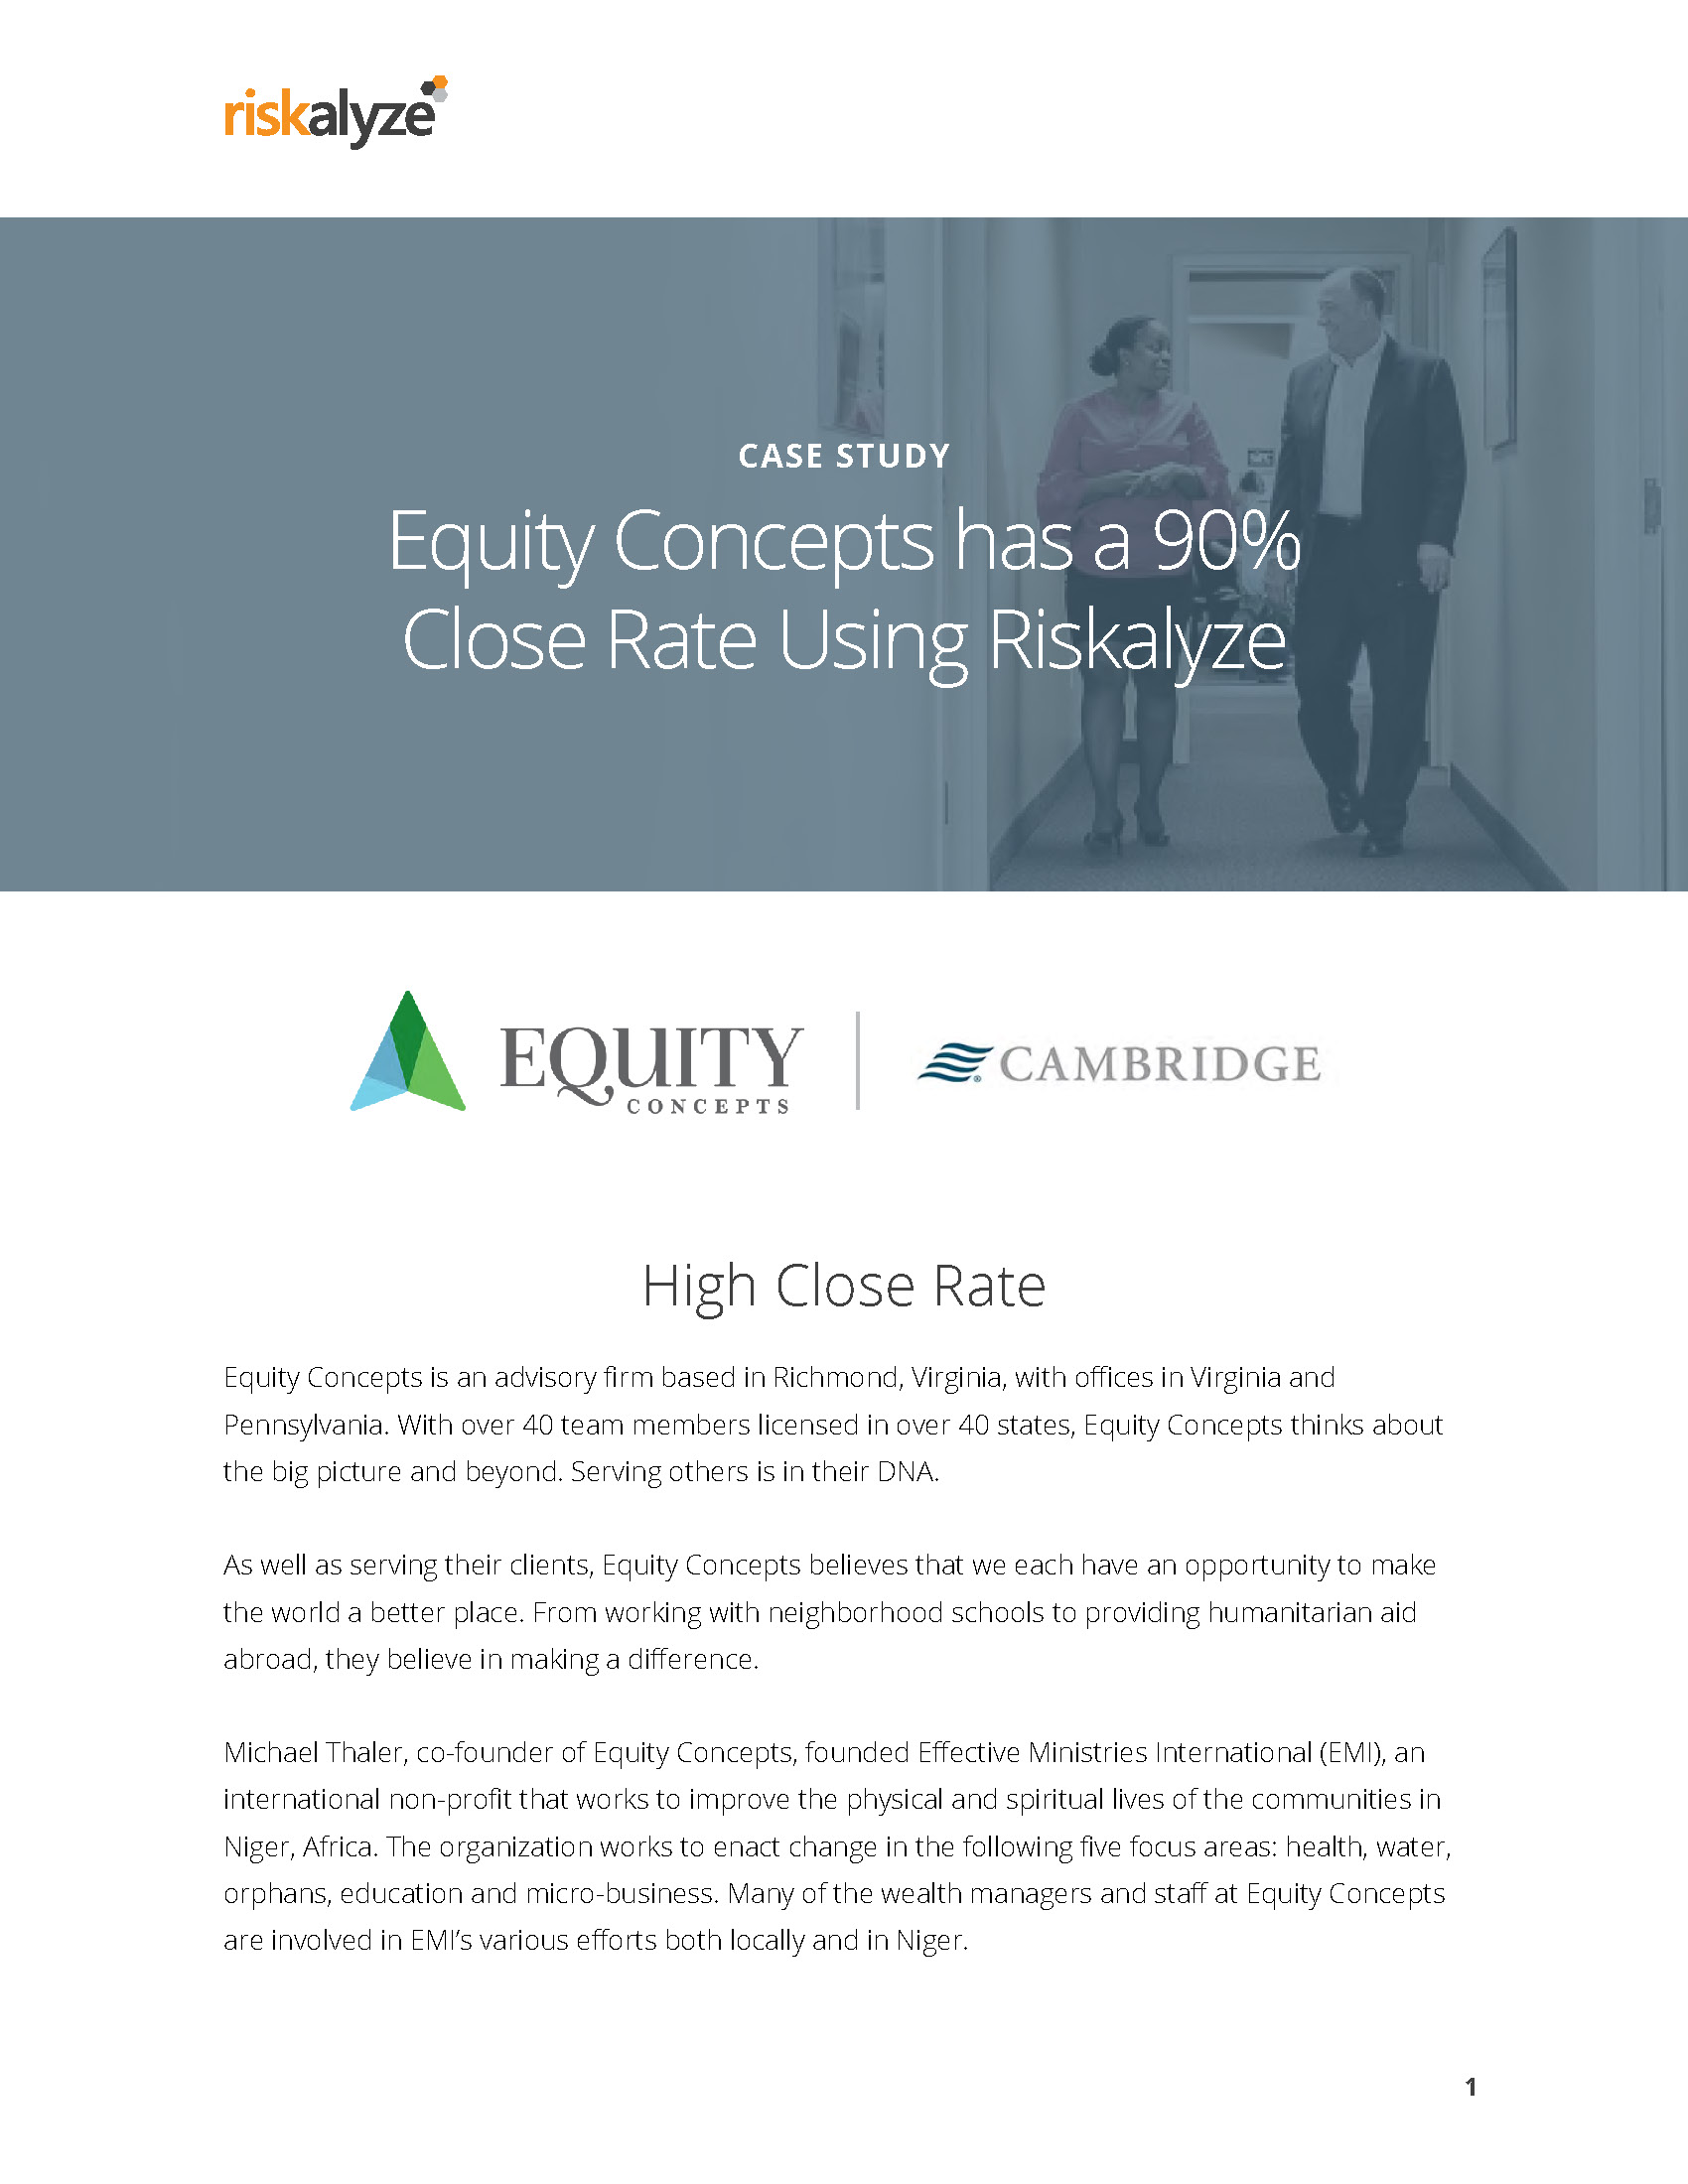 Cambridge-Equity Concepts Case Study v3_Page_1